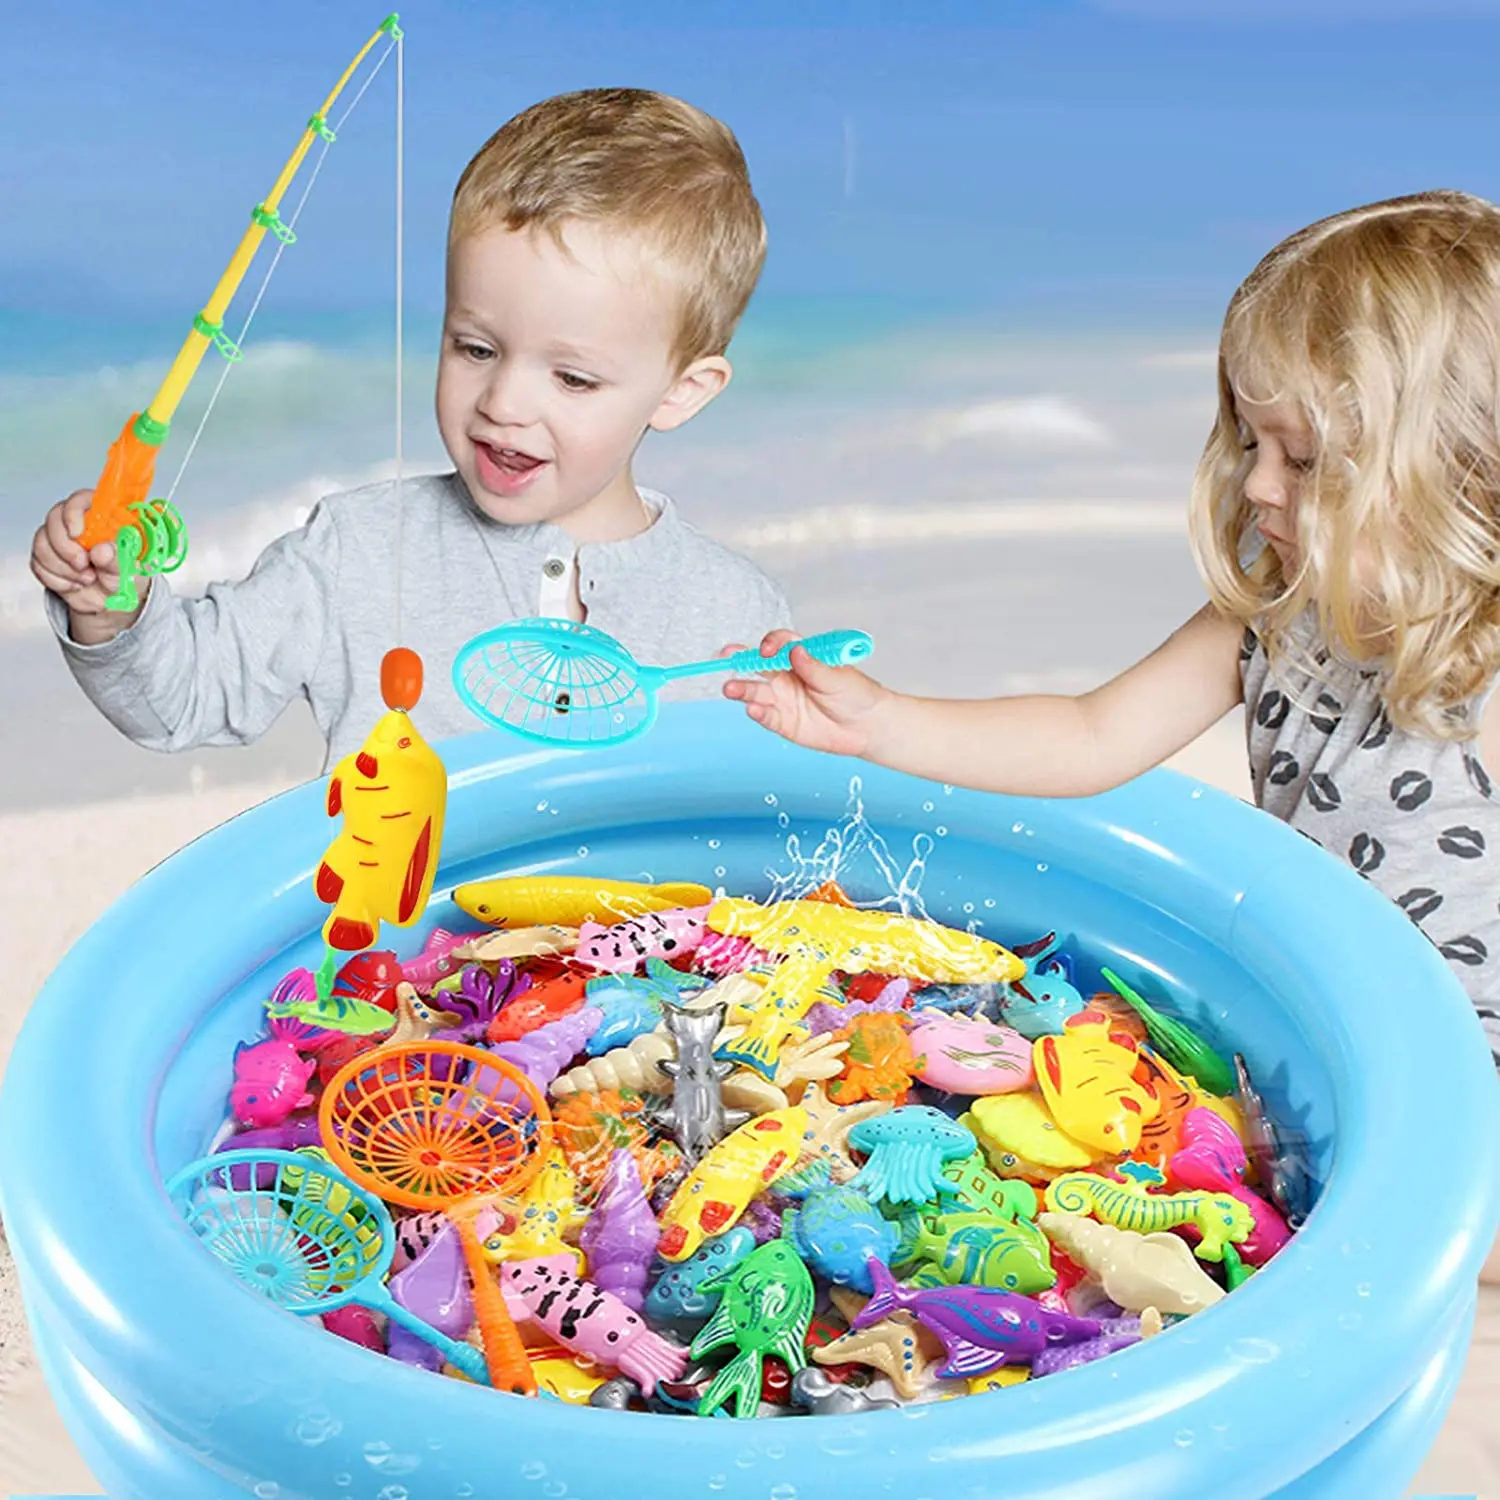 https://ae01.alicdn.com/kf/S6a60c54c28504c90803a0e9efee8fe83x/Kids-Magnetic-Fishing-Toy-Set-with-Inflatable-Pool-Playing-Water-Baby-Bath-Toys-Fishing-rod-Outdoor.jpg